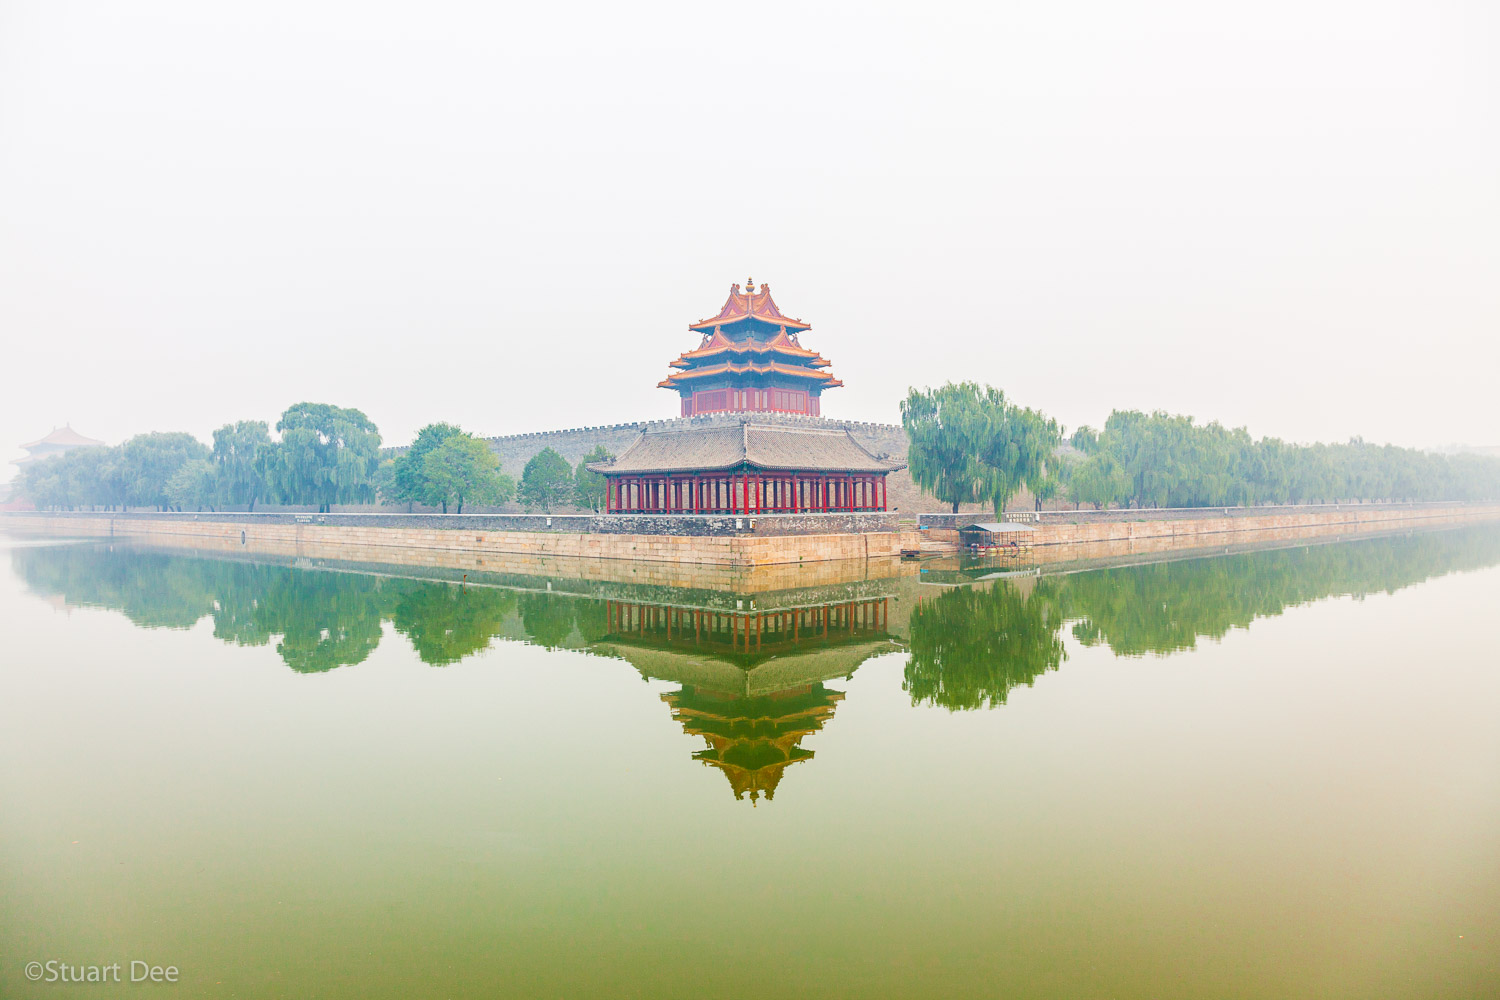  Watchtower of Forbidden city in fog, reflected in moat, Beijing, China 